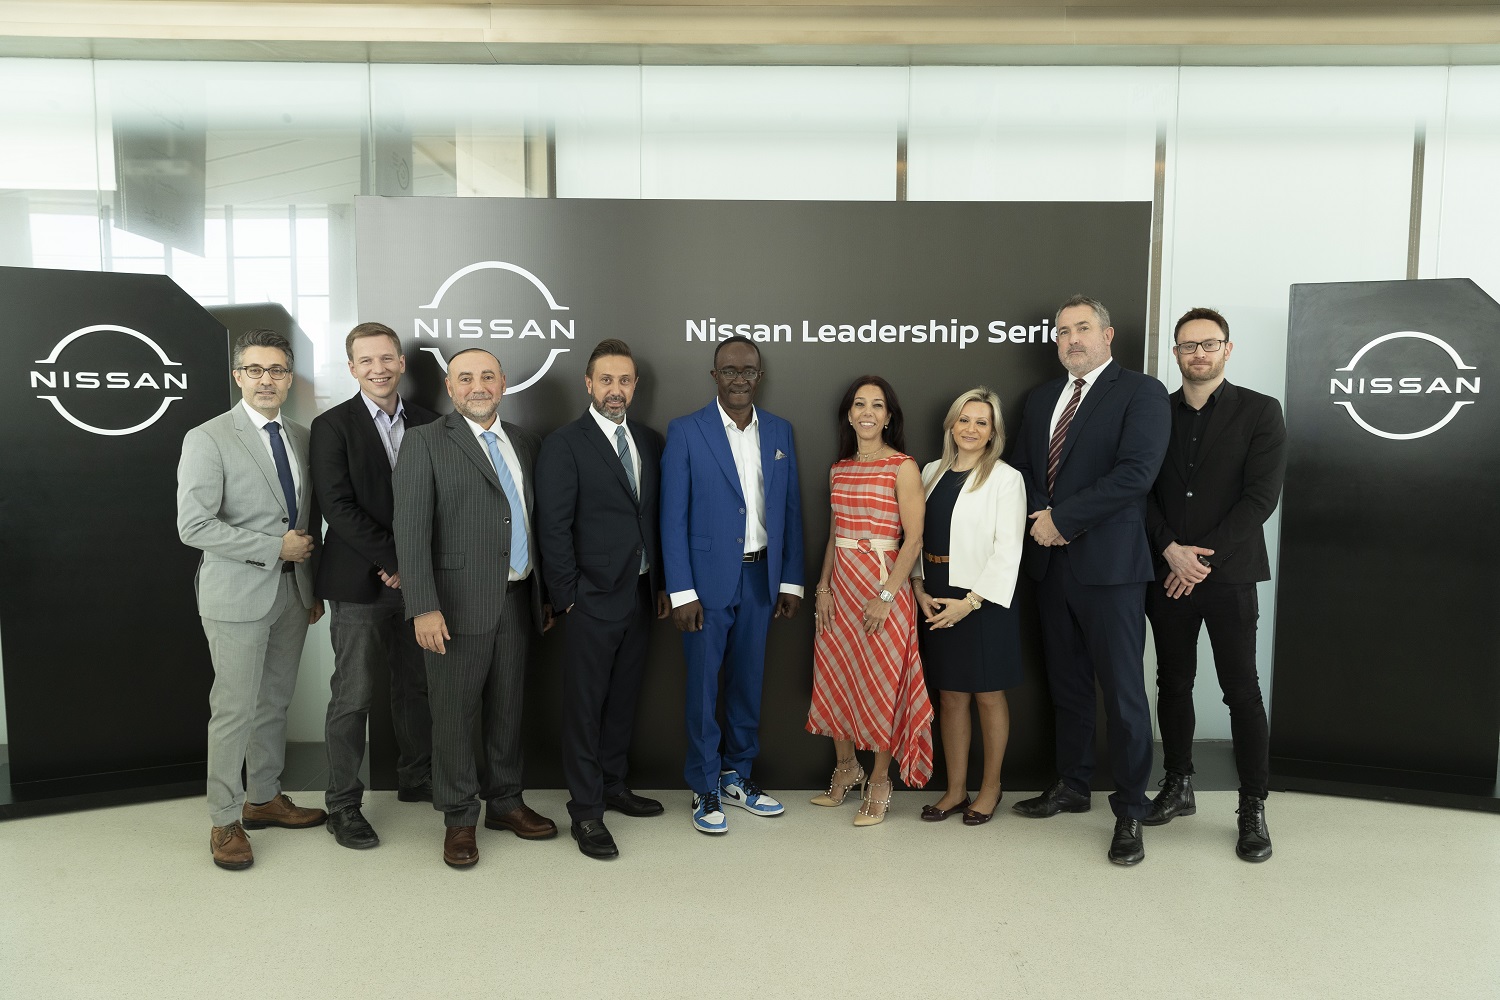 Nissan’s Leadership Series Puts Spotlight on the Middle East as ‘Region of Opportunity’